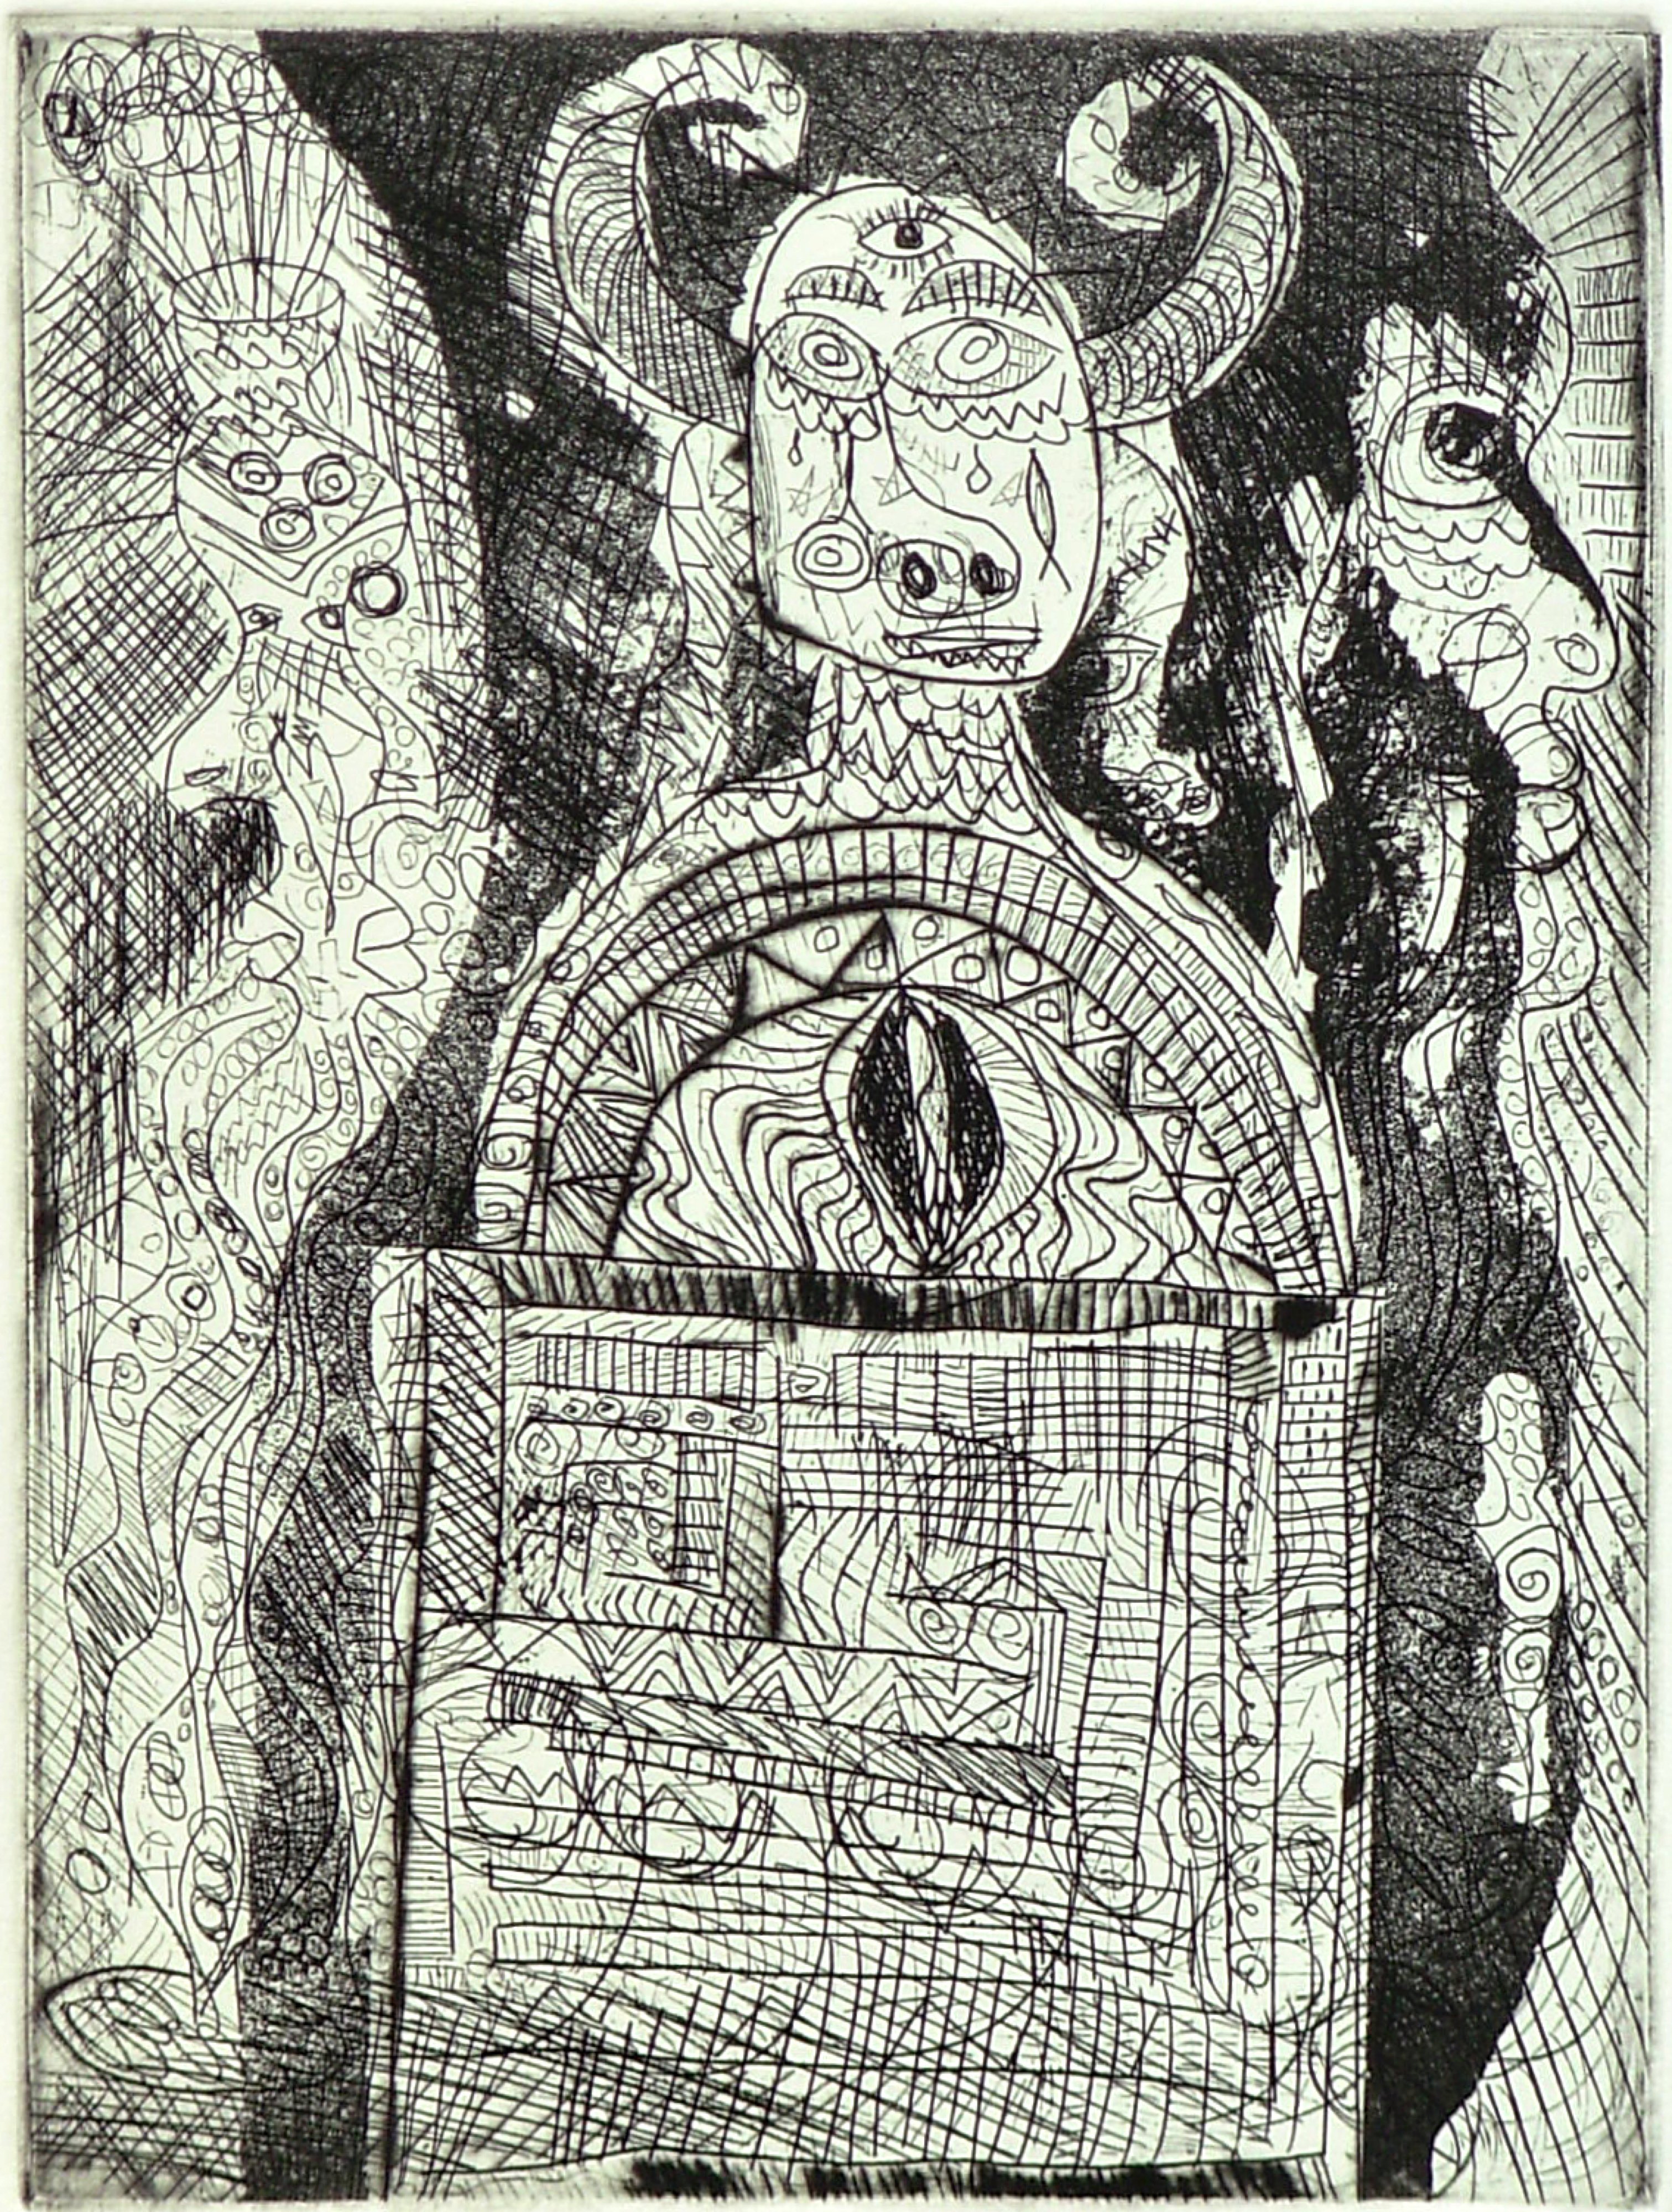 Jerry  Di Falco: 'San Francisco Juke Box Minotaur Hipster', 2008 Etching, Mythology. San Francisco Juke Box Minotaur Hipster, IS THE FULL TITLE OF THE INTAGLIO ETCHING. This work is part of a series inspired by the beat poets in San Francisco circa 1958.  The print size is 15 inches high by 11 inches wide. The work was hand printed and published by ...